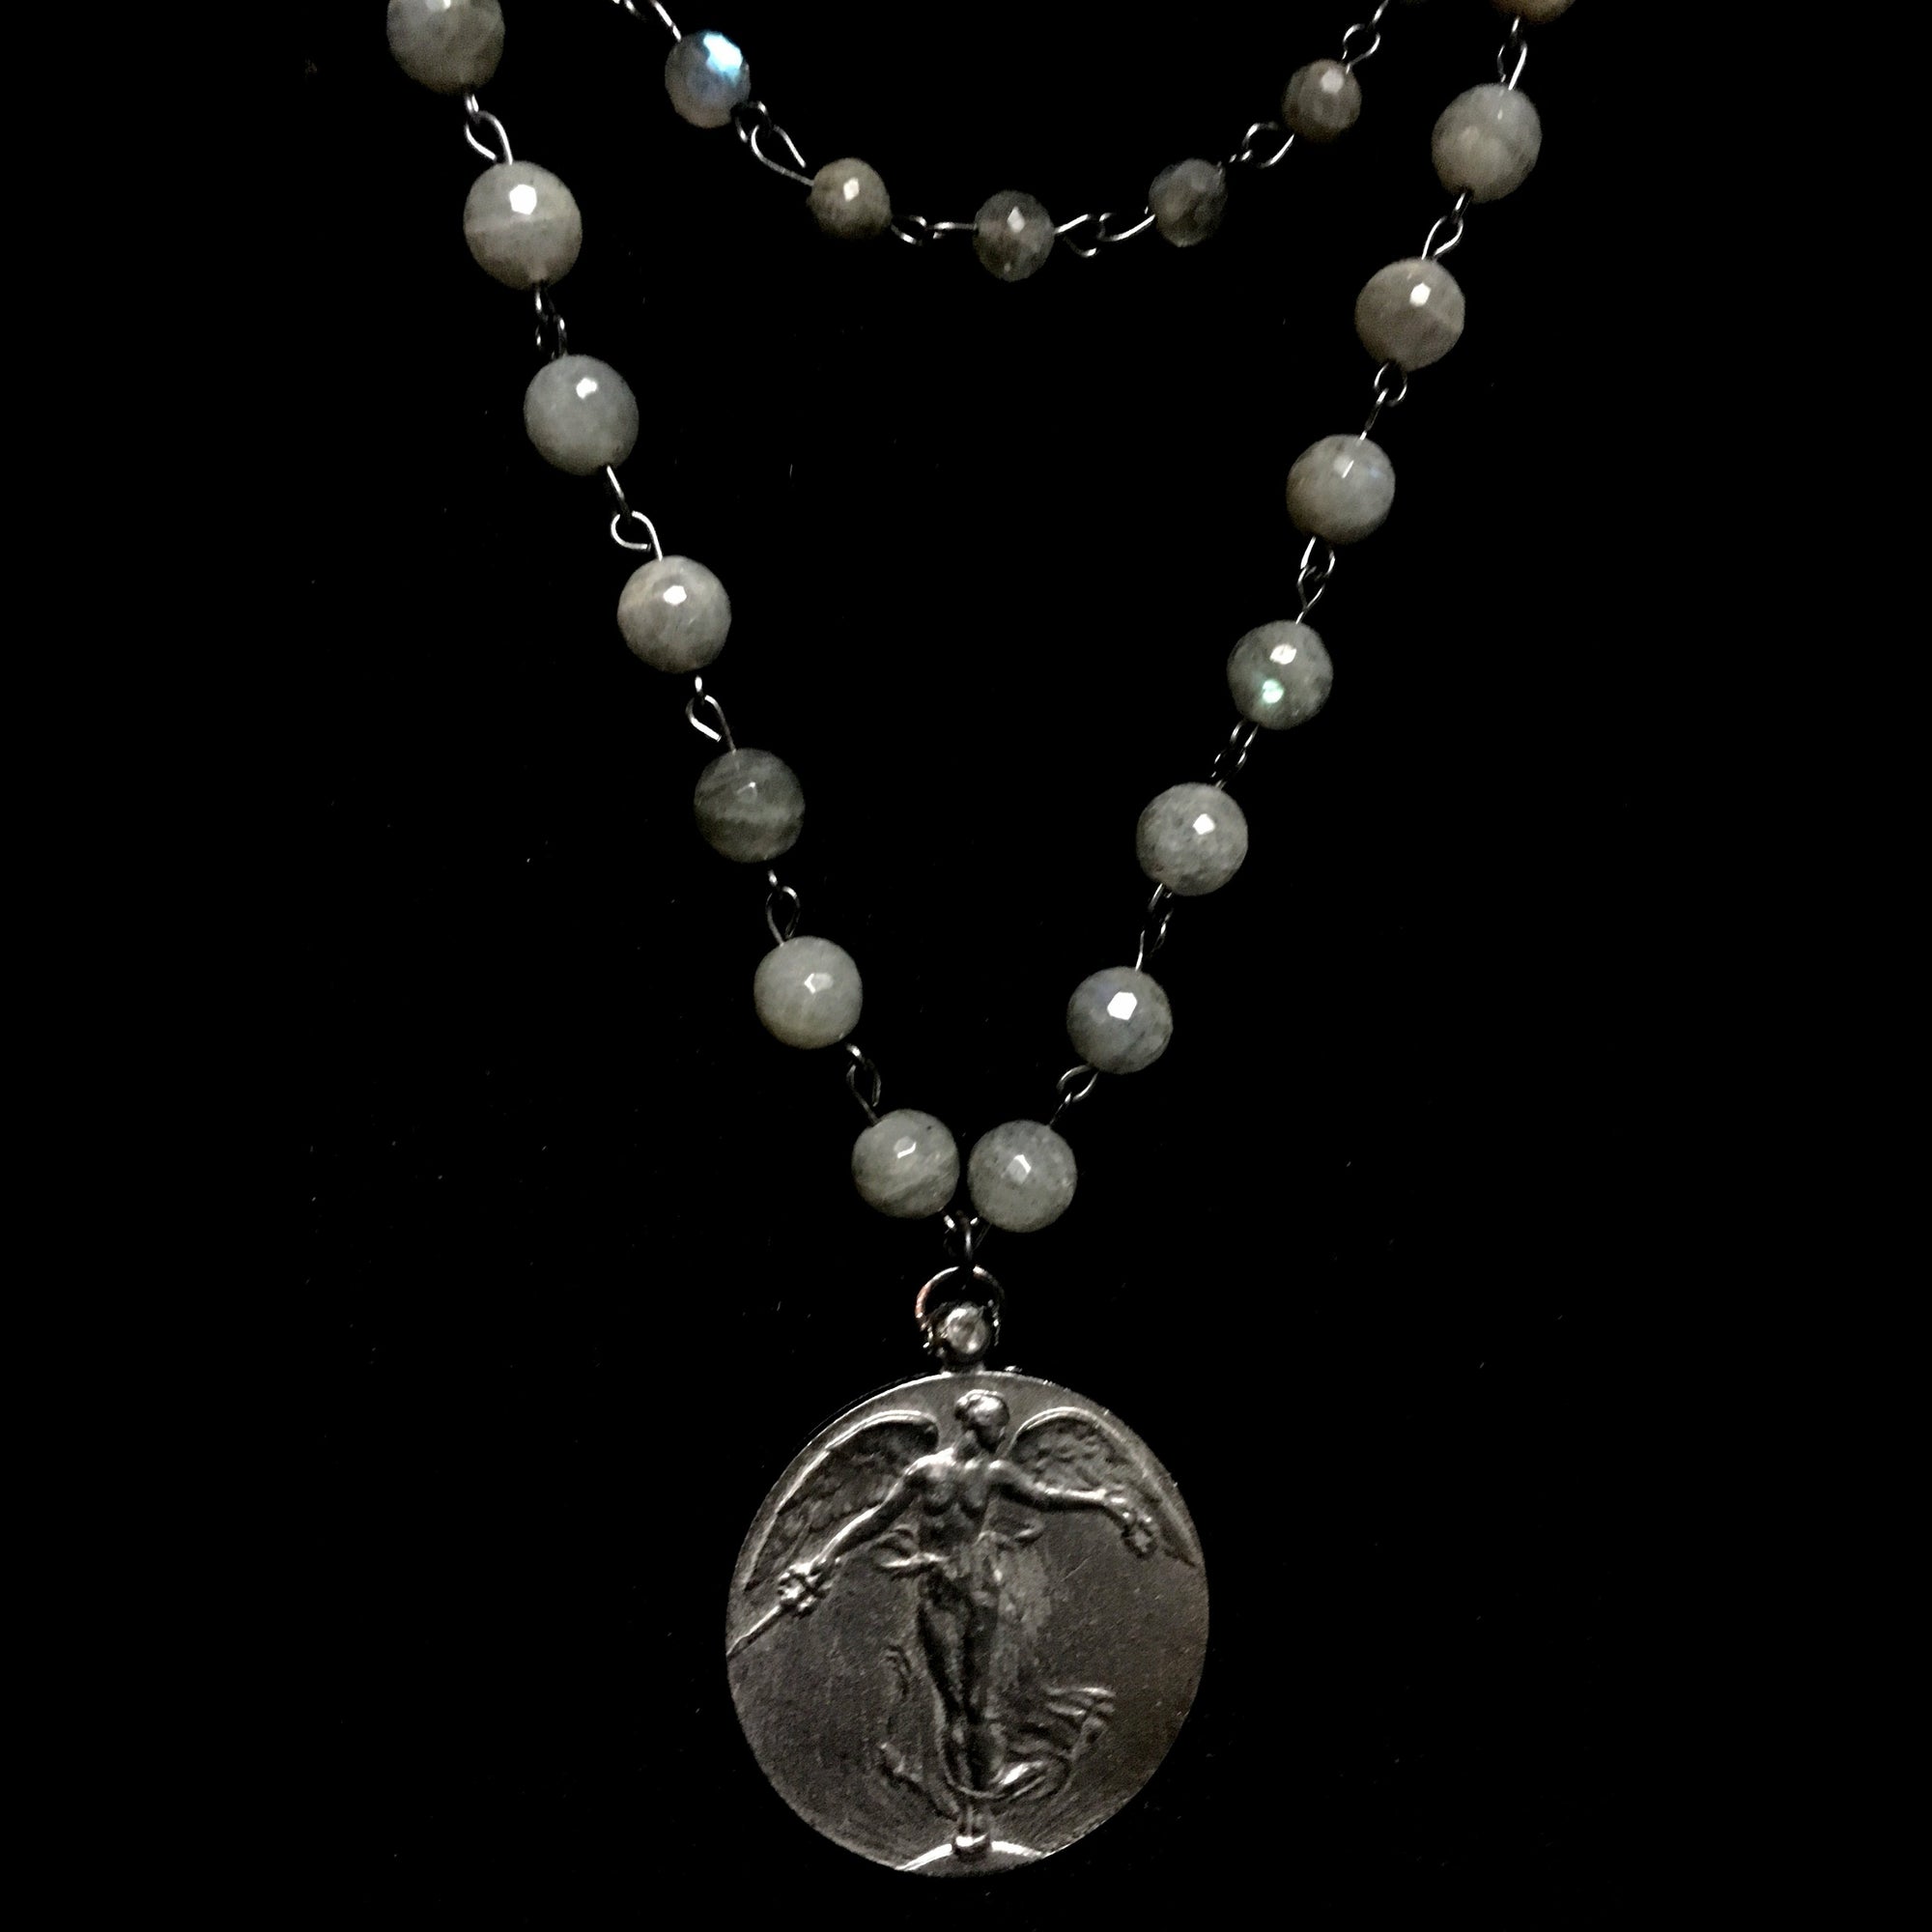 Limited Edition Northern Lights Peace Angel Medallion Necklace by Whispering Goddess